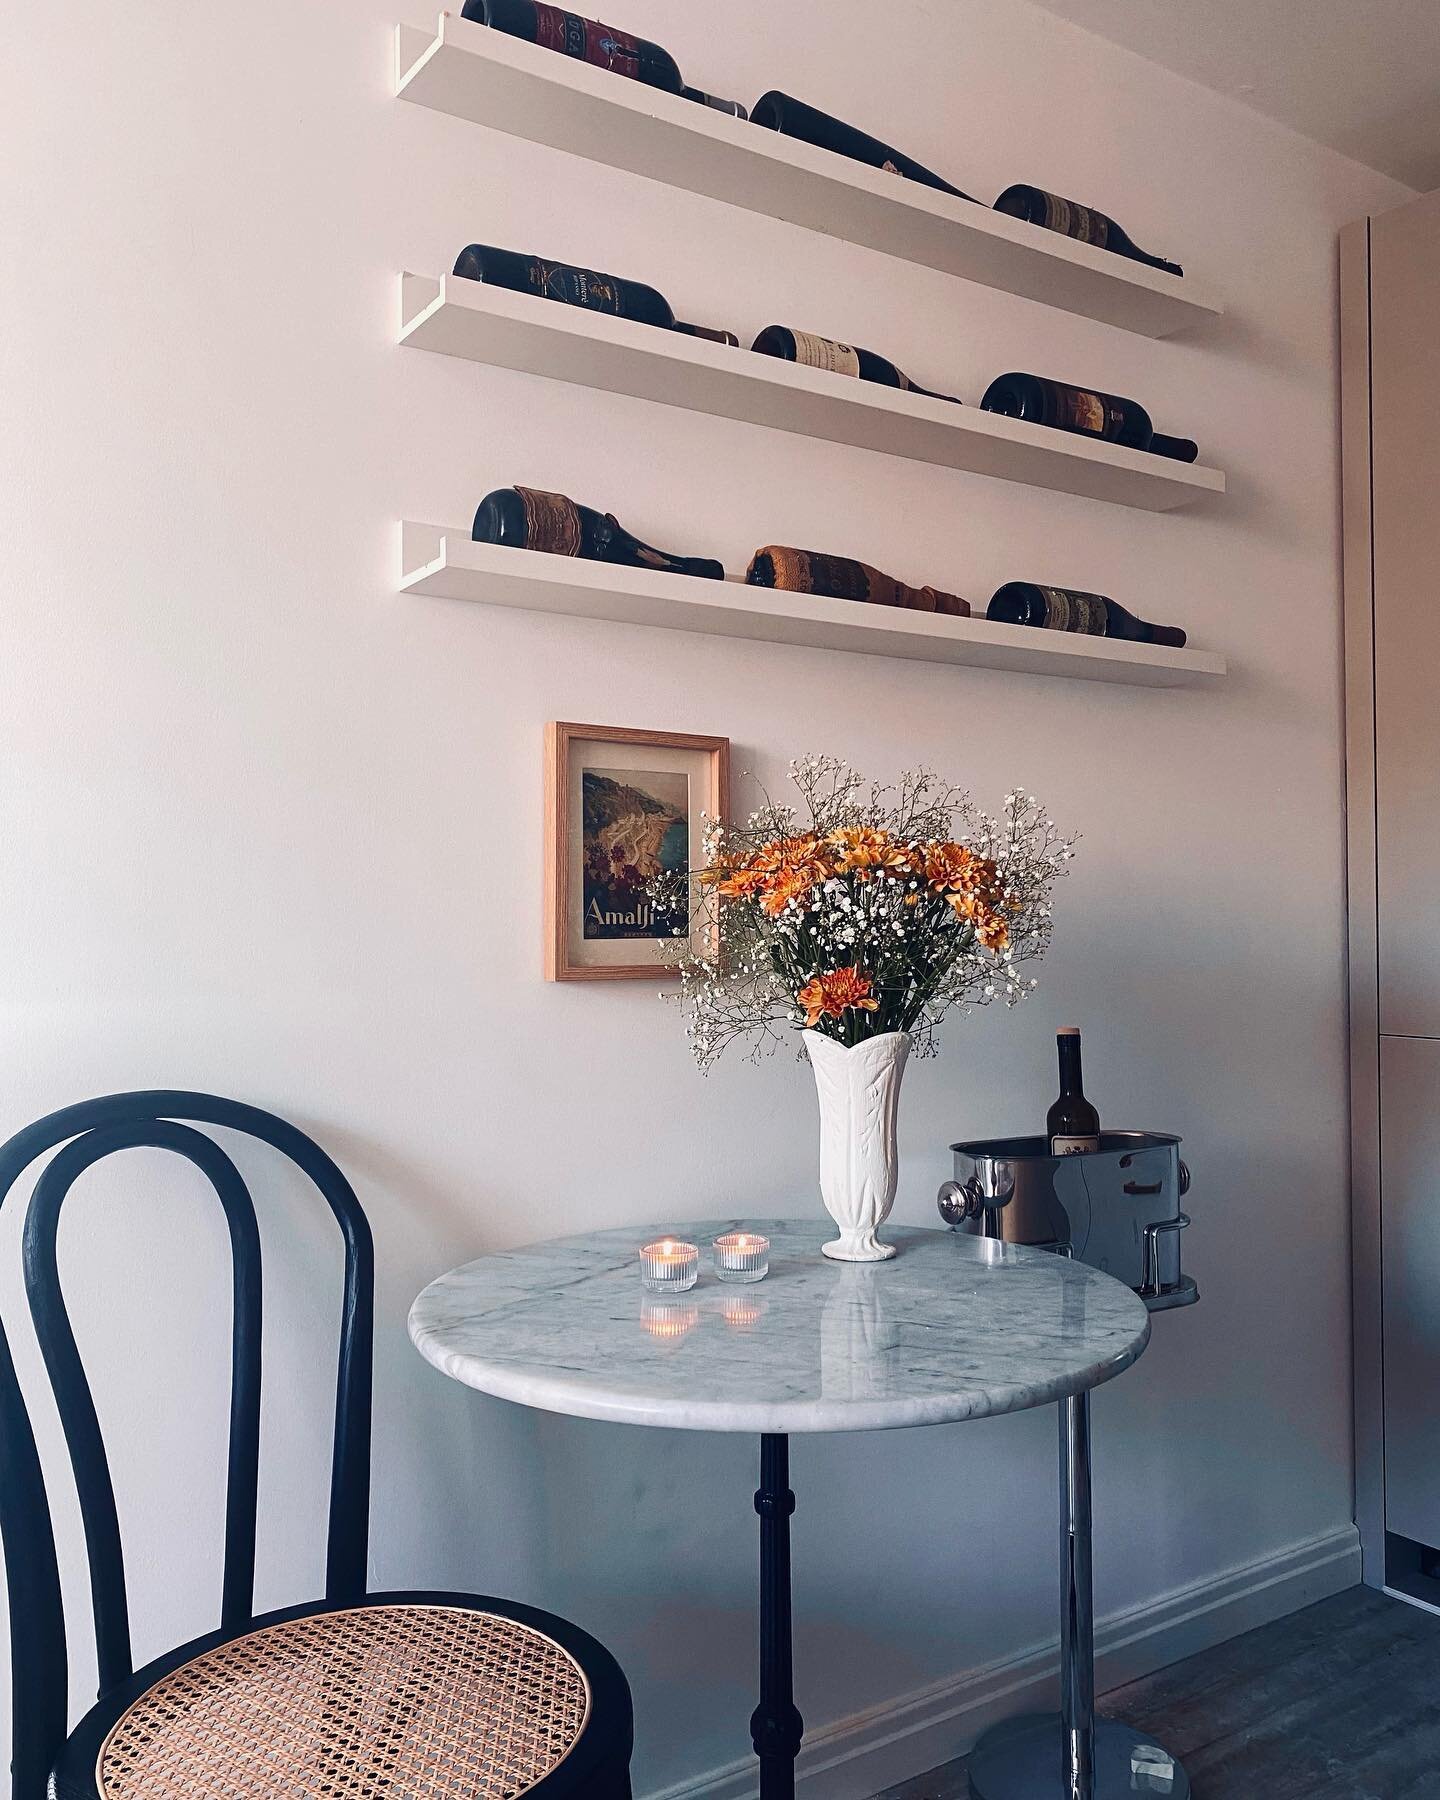 How to feel like Beyonc&eacute; by putting up a shelf&hellip;

In my last house when I was first redecorating, I decided that I was going to start making a little office space for myself. High off a trip to ikea, I came home with all my blue bags of 